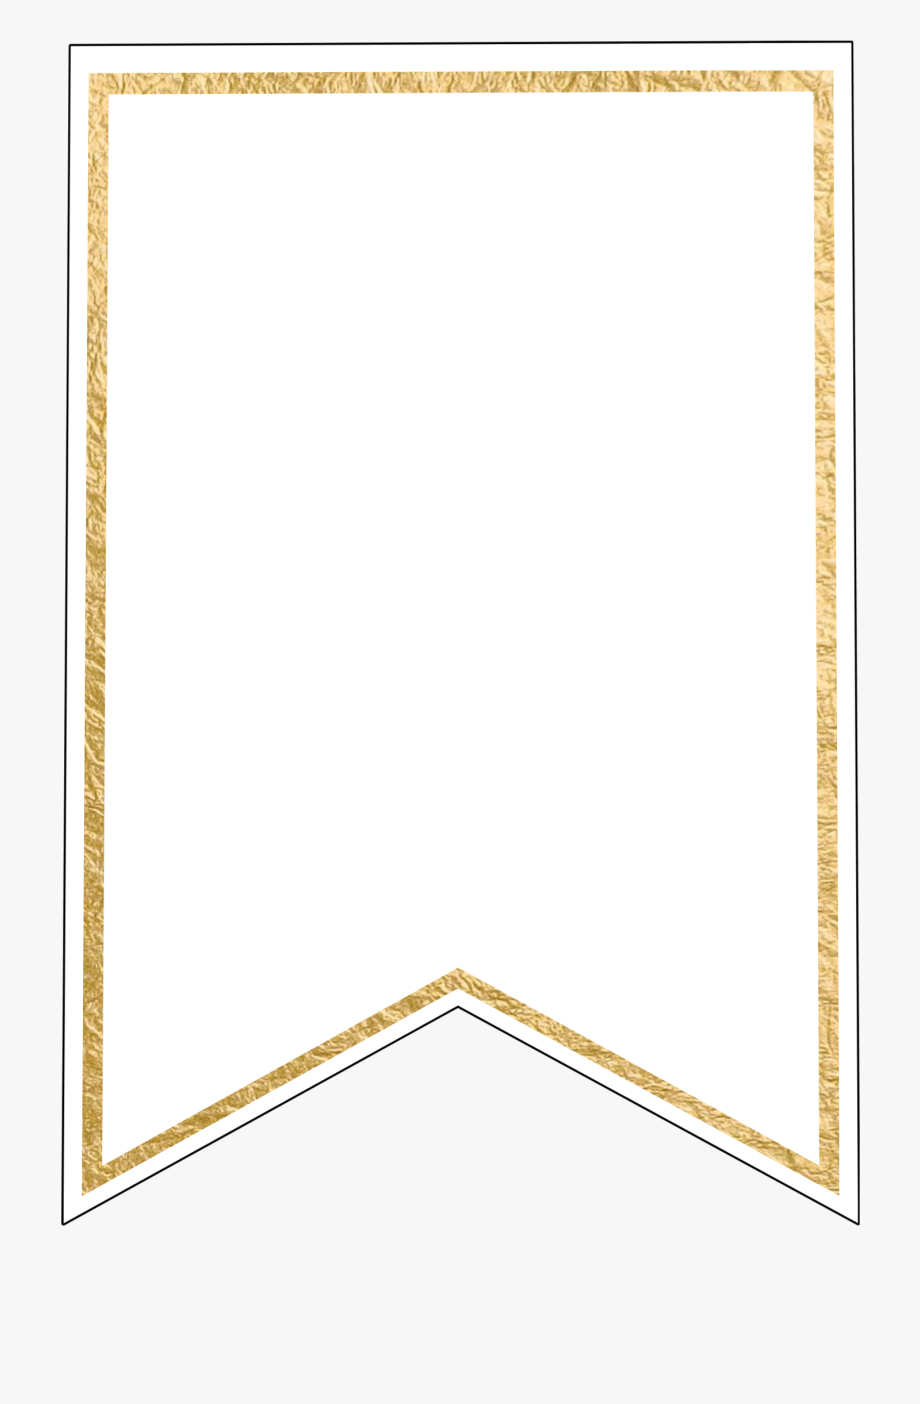 Free Pennant Banner Template, Download Free Clip Art, – Gold Regarding Free Printable Pennant Banner Template